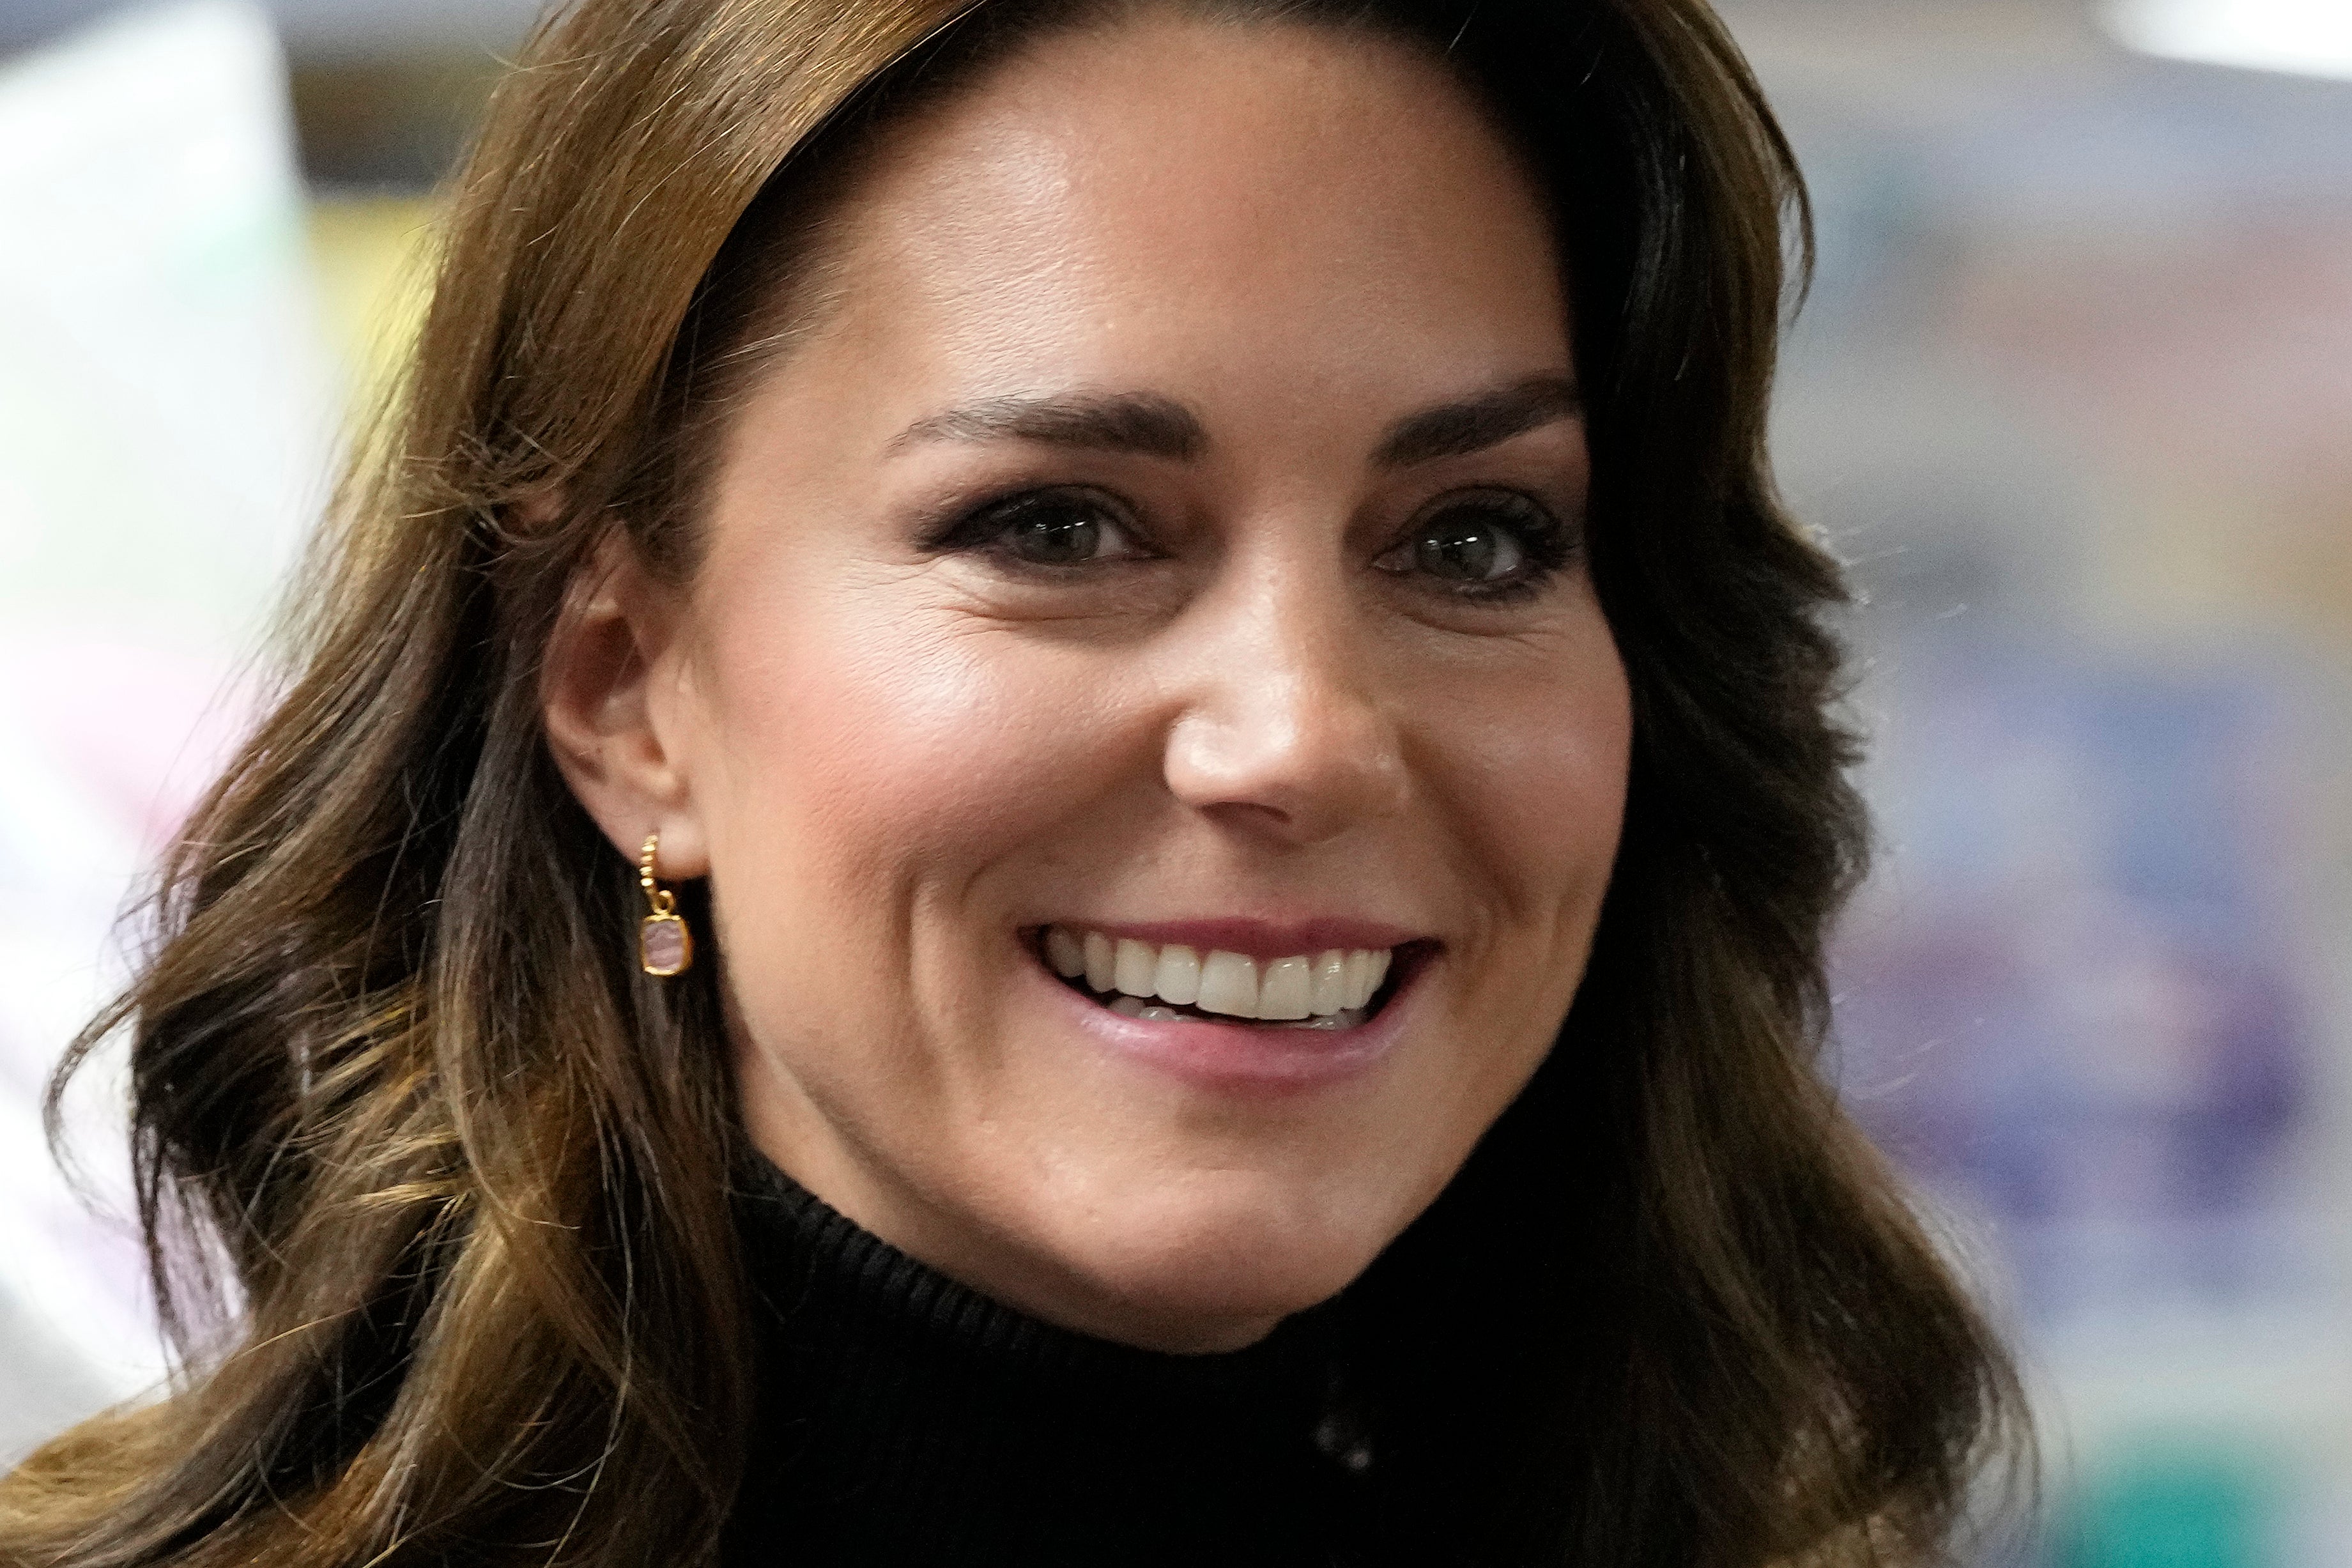 Kate Middleton underwent abdominal surgery in January